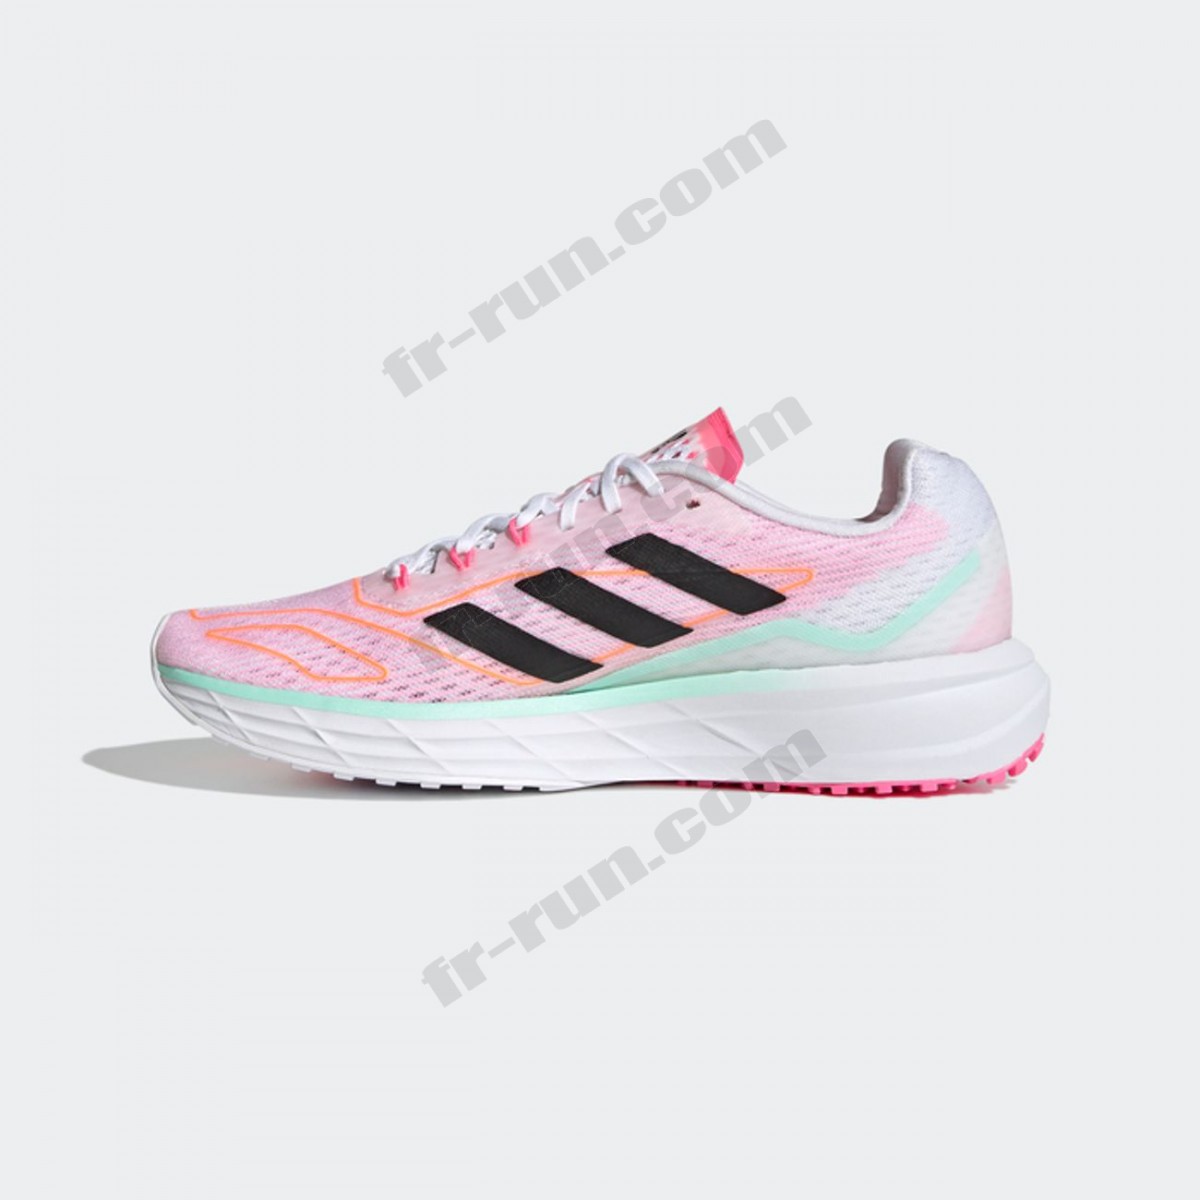 Adidas/CHAUSSURES BASSES running femme ADIDAS SL20.2 W √ Nouveau style √ Soldes - -1